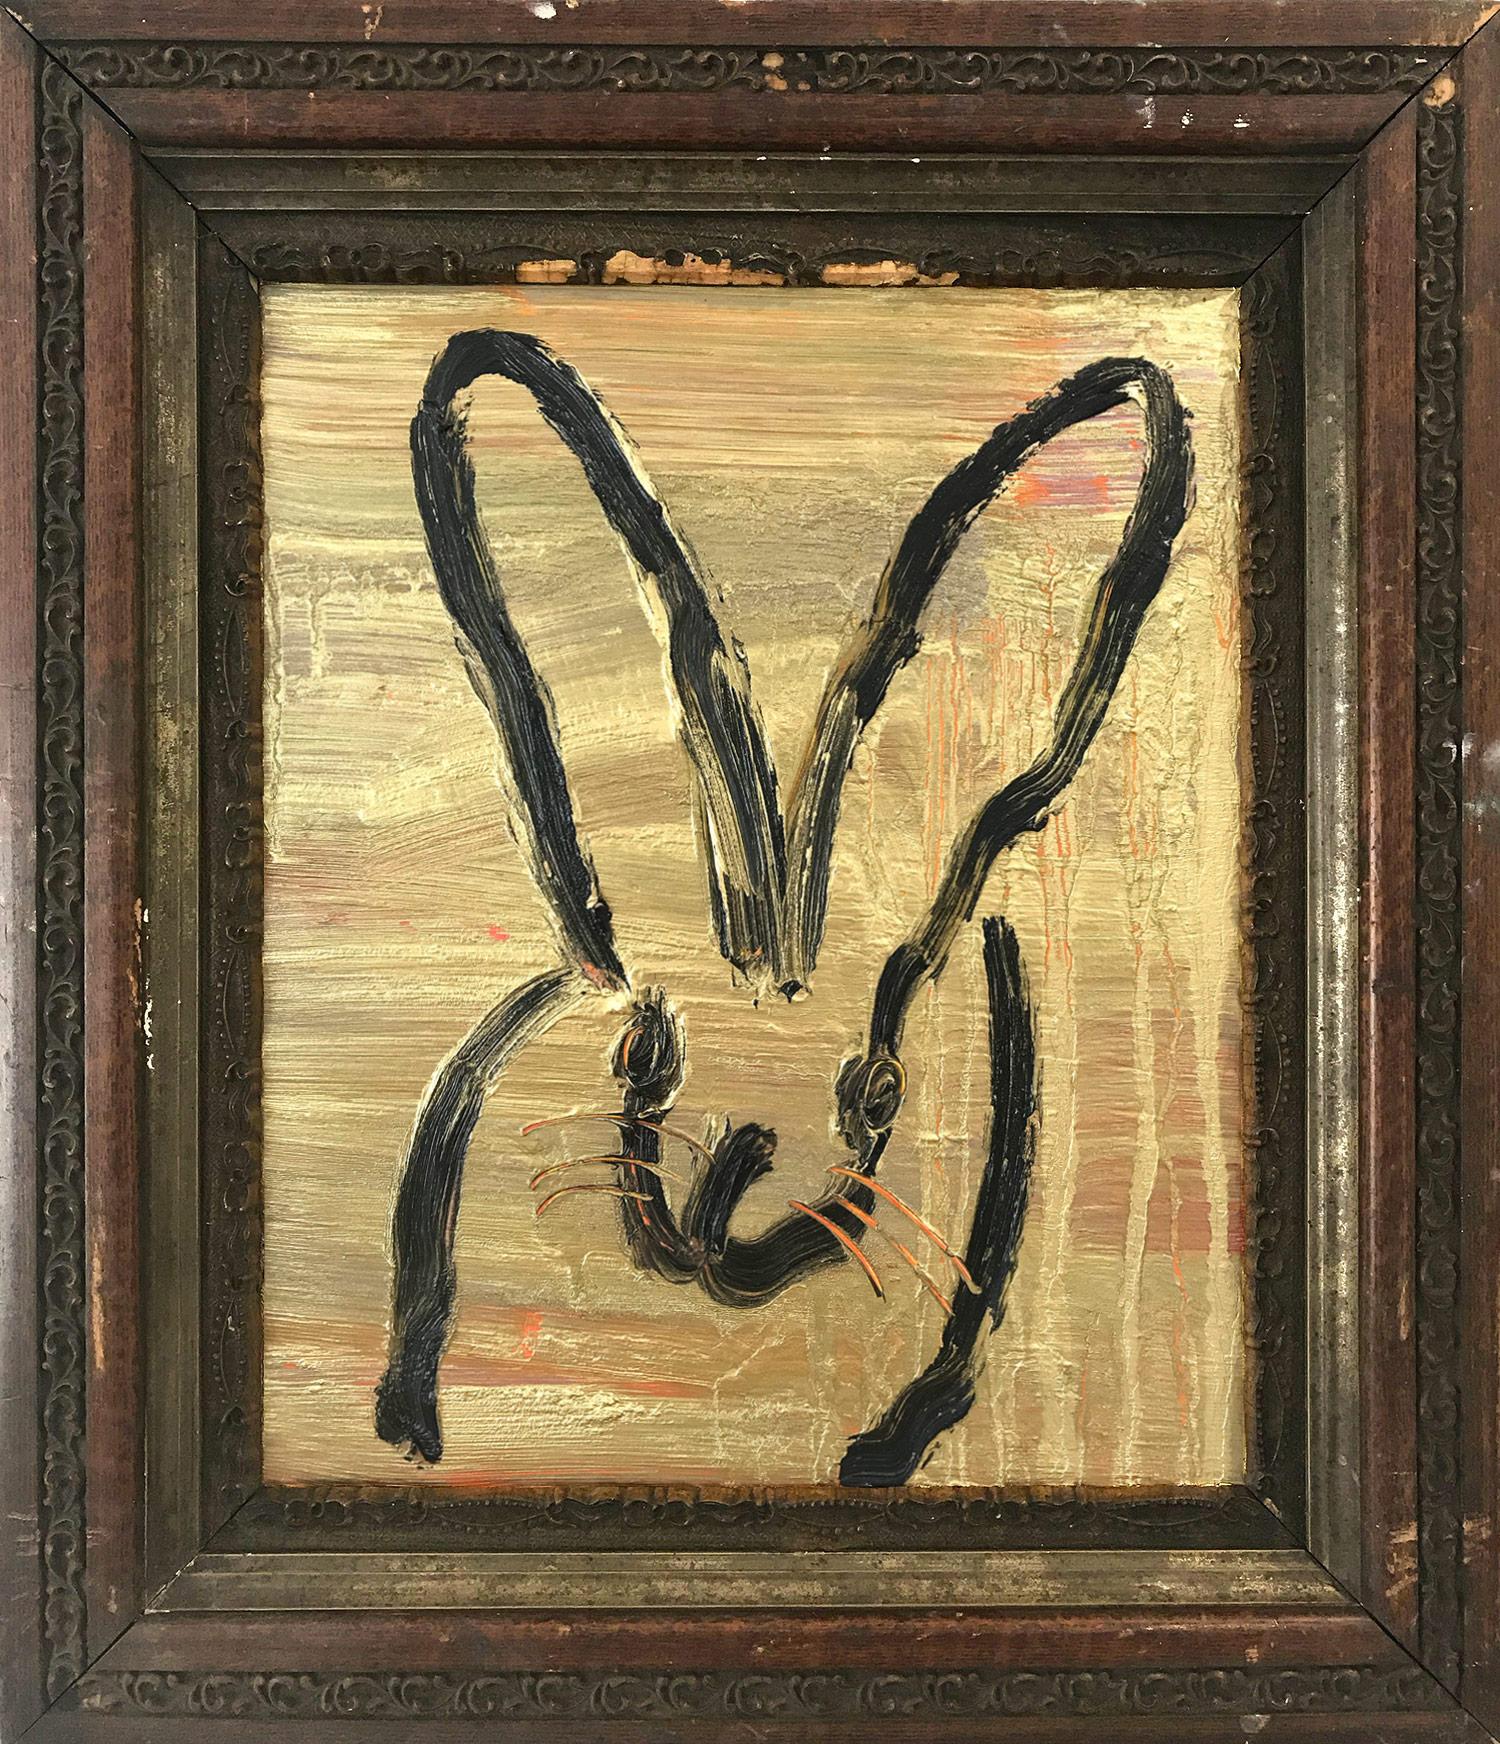 "Golden" (Black Bunny on Gold Background with Multi Colored accents) Oil on Wood